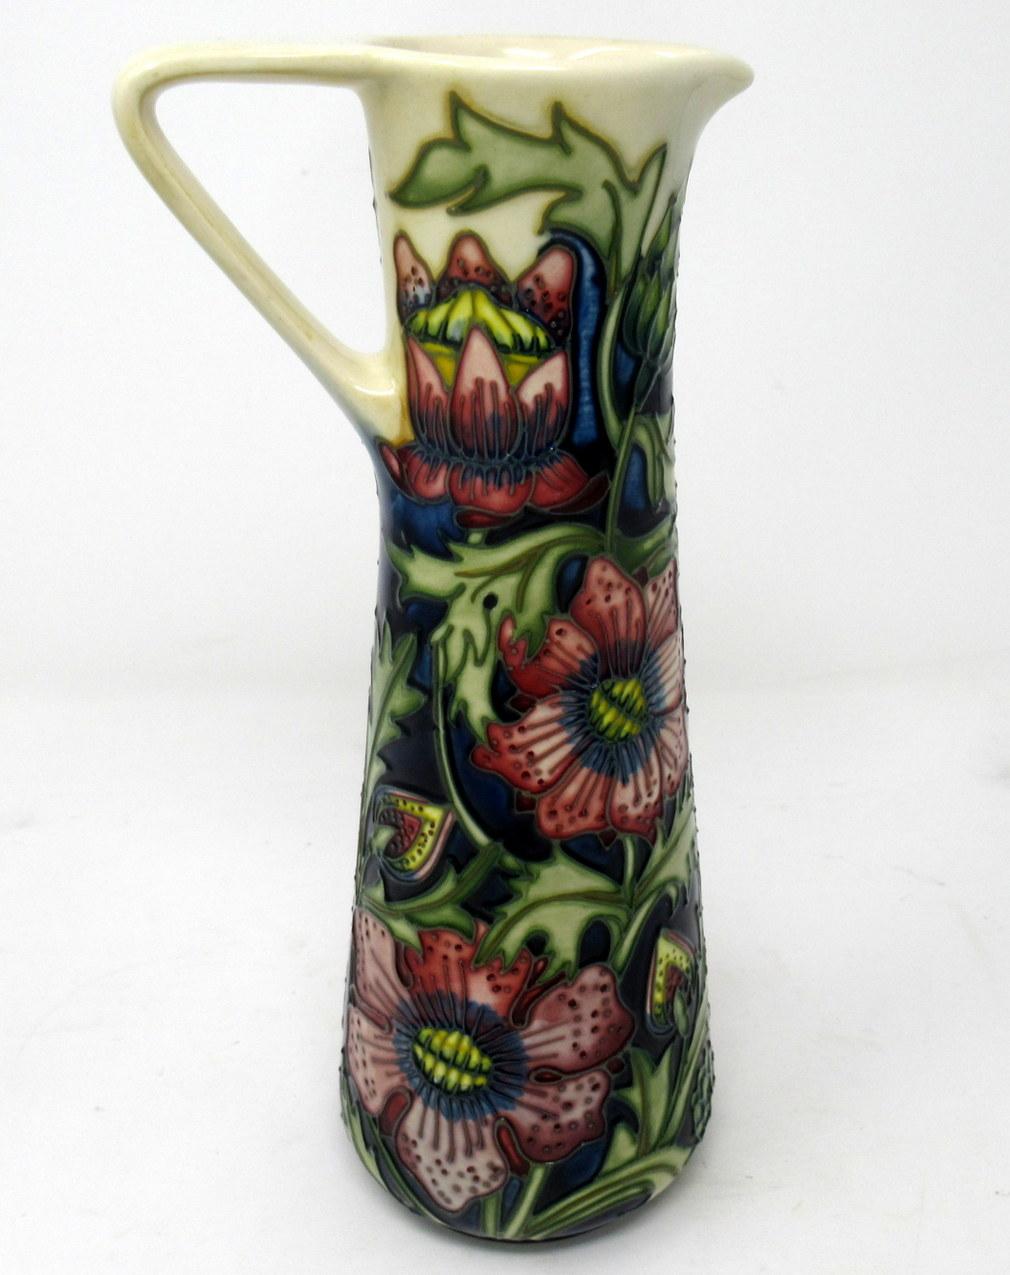 Superb hand painted Art Pottery Moorcroft Large Ewer of traditional outline with single “V” shaped handle. Made in stoke-in-trent, England. Decorated in the “Pheasants Eye” Pattern by premier Moorcroft Artist Shirley Hayes. 

The outer body with